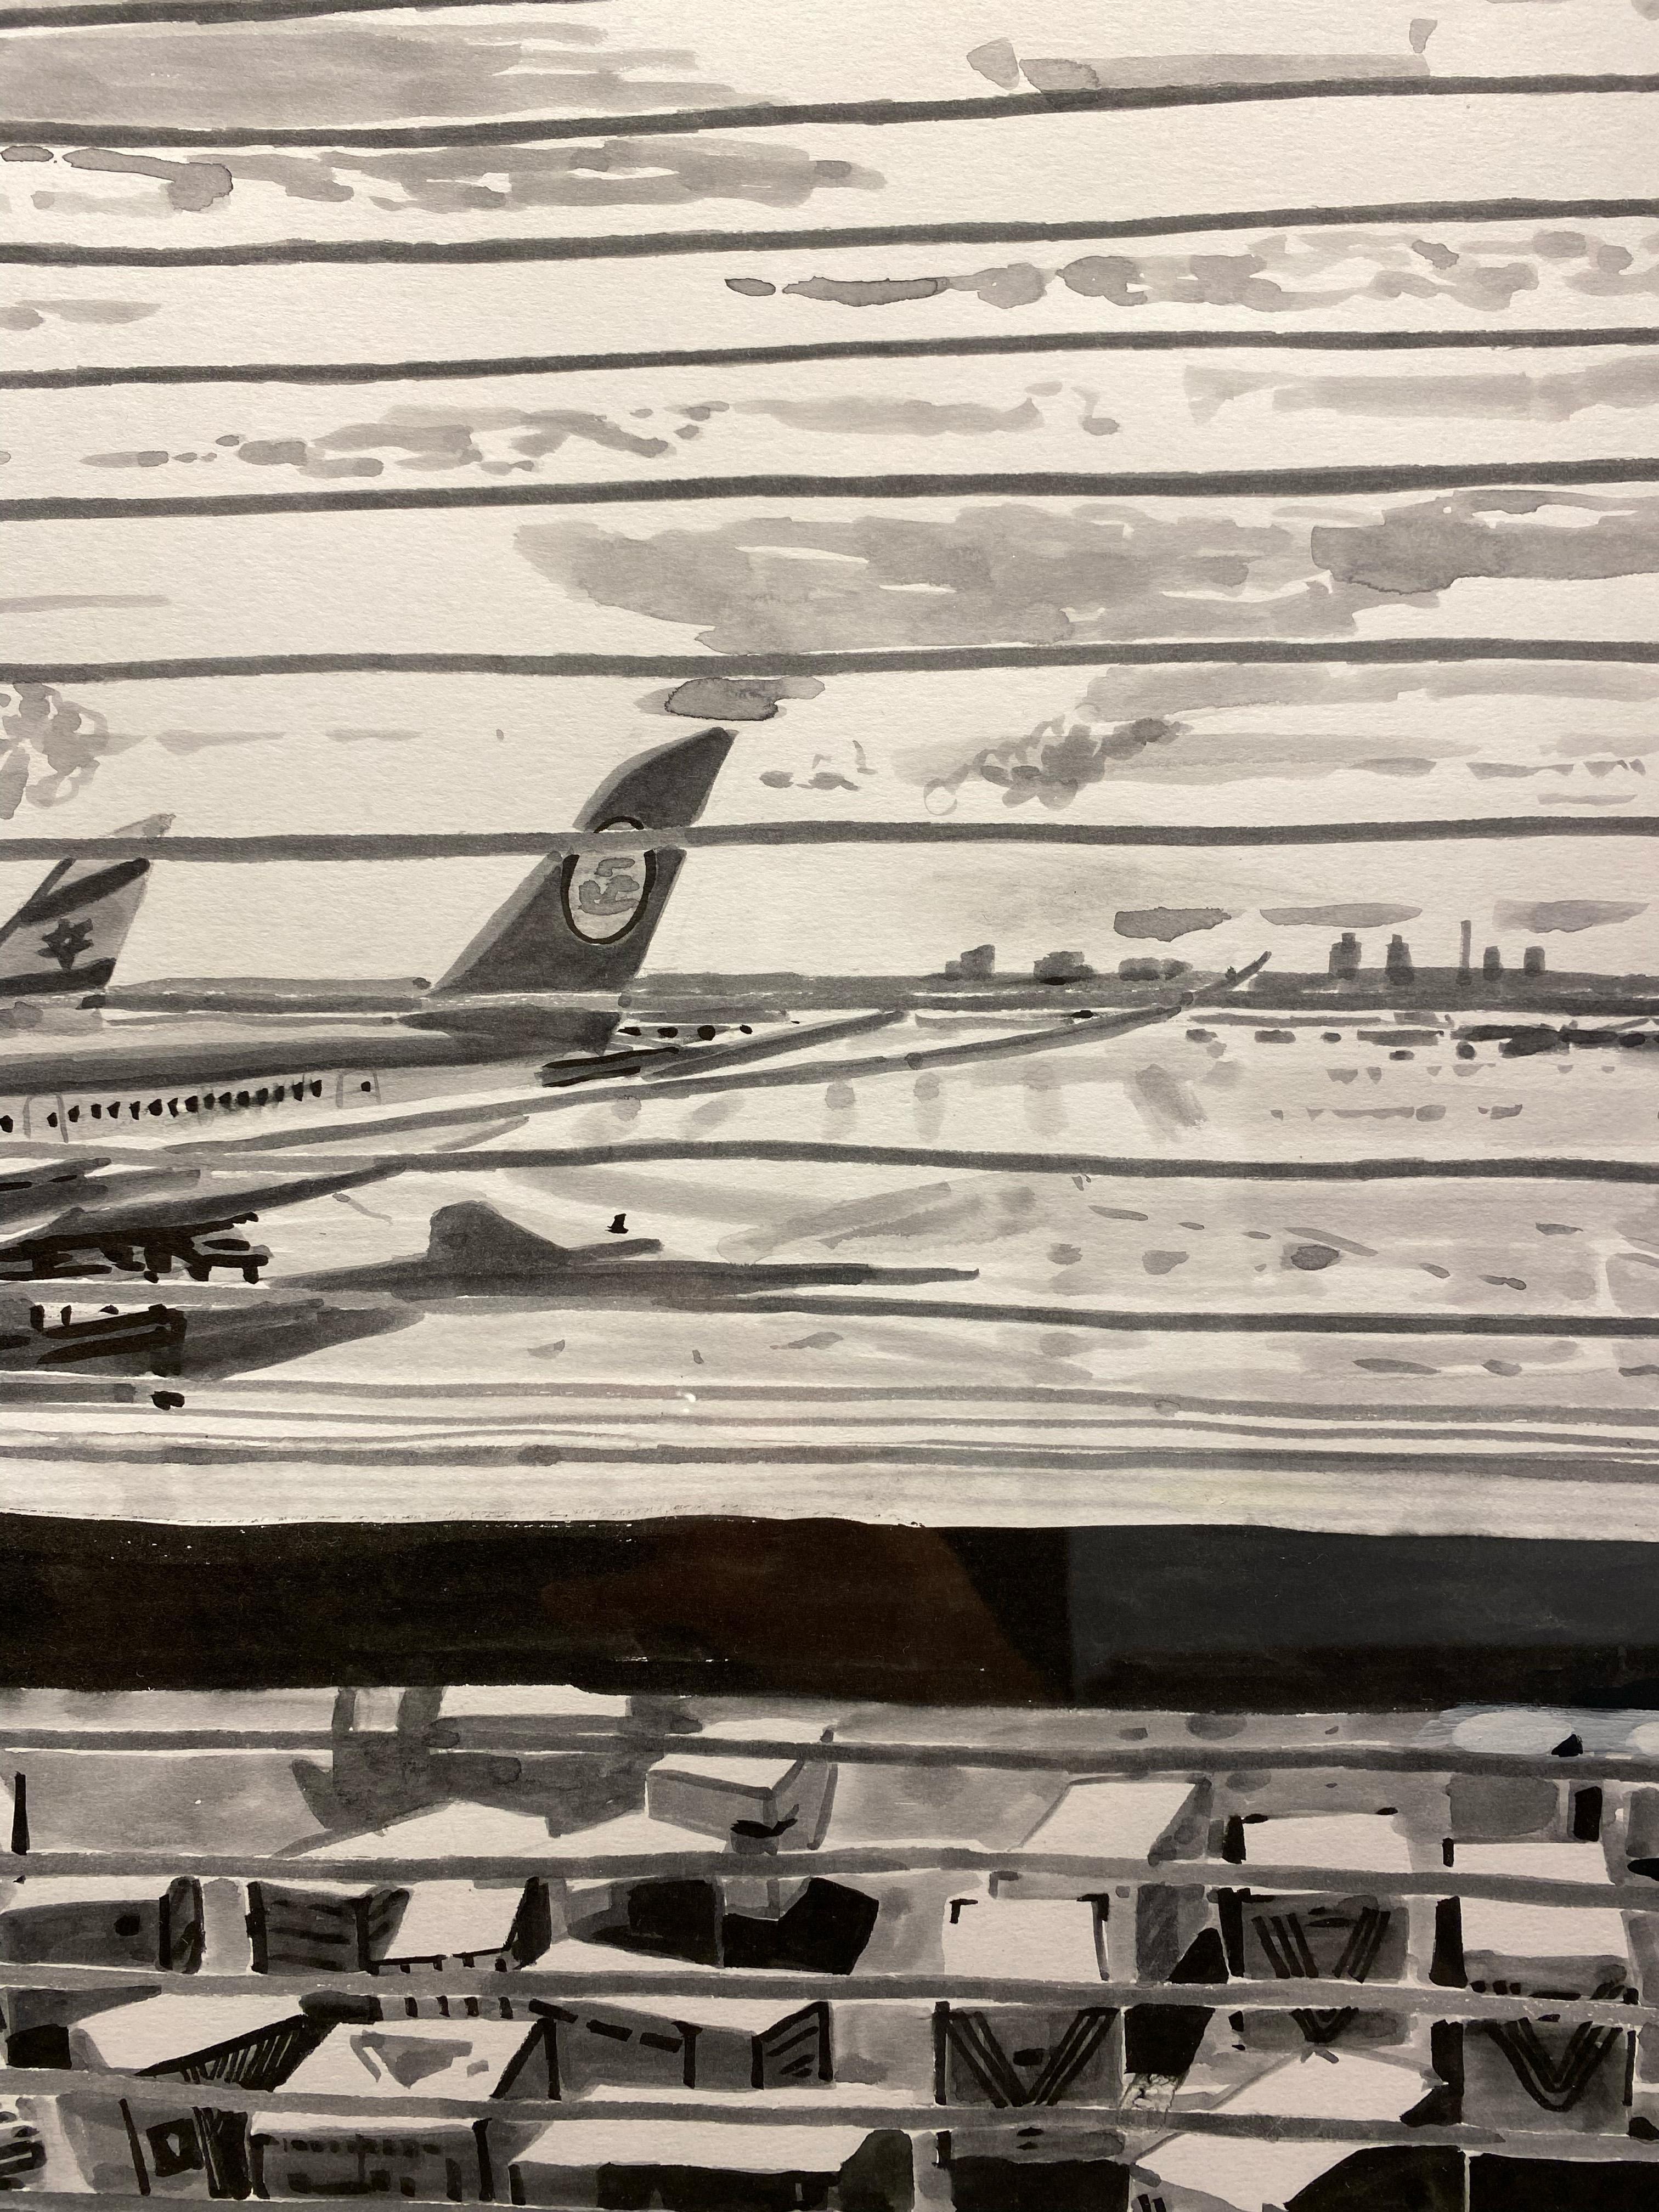 Patrick Vale
Airport
ink on paper
19h x 24w in
48.26h x 60.96w cm
PKV009

See What I See
Why are Chicago and baseball so perfect for each other?  What is it about this city, this team, that captures the imagination?

Patrick Vale, a British born